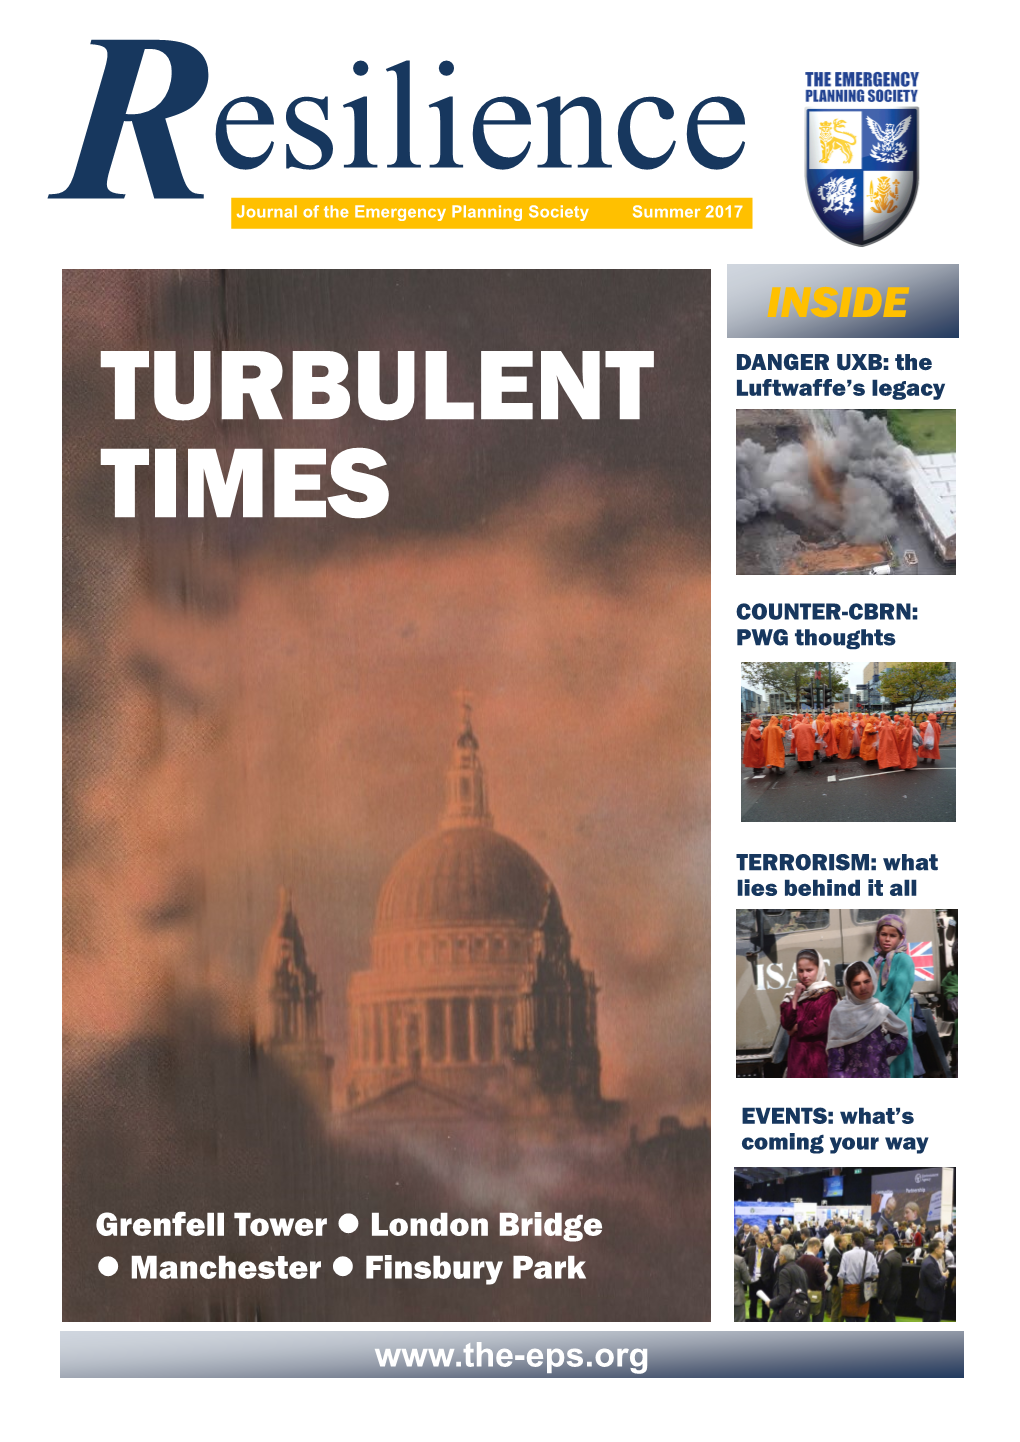 Turbulent Times Grenfell Tower Tragedy, the EPS Issued Statements to the Media Expressing Condolences, and Outlining the EPS’S Grenfell Tower Viewpoint